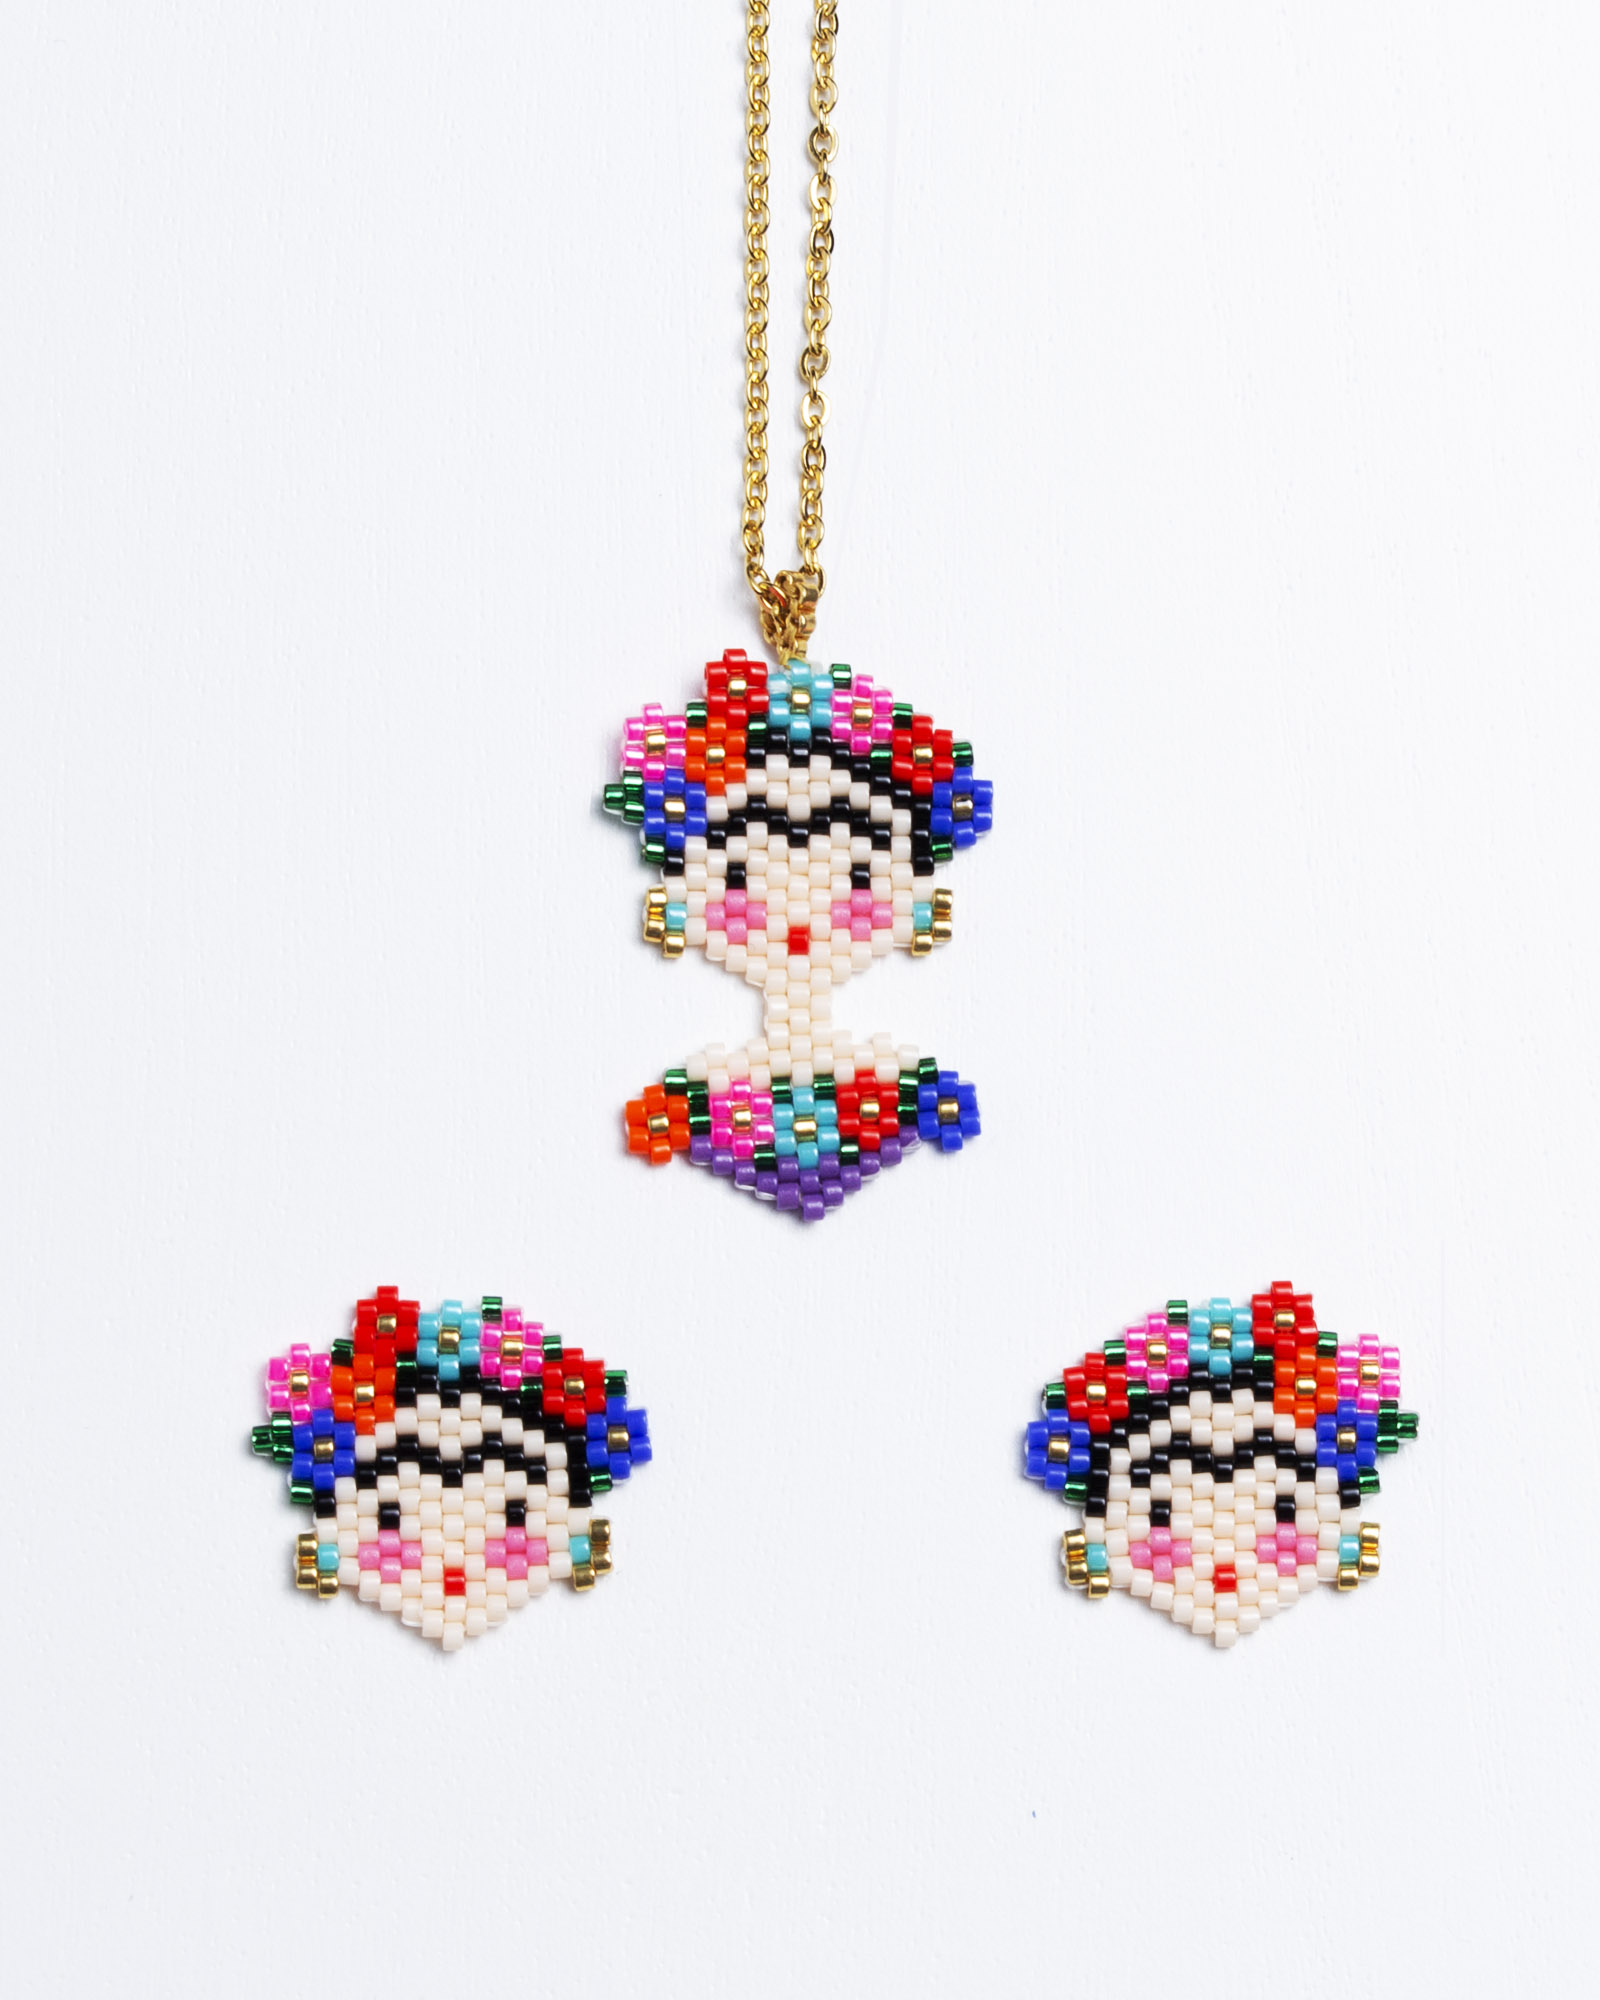 Frida Necklace and Earrings Set